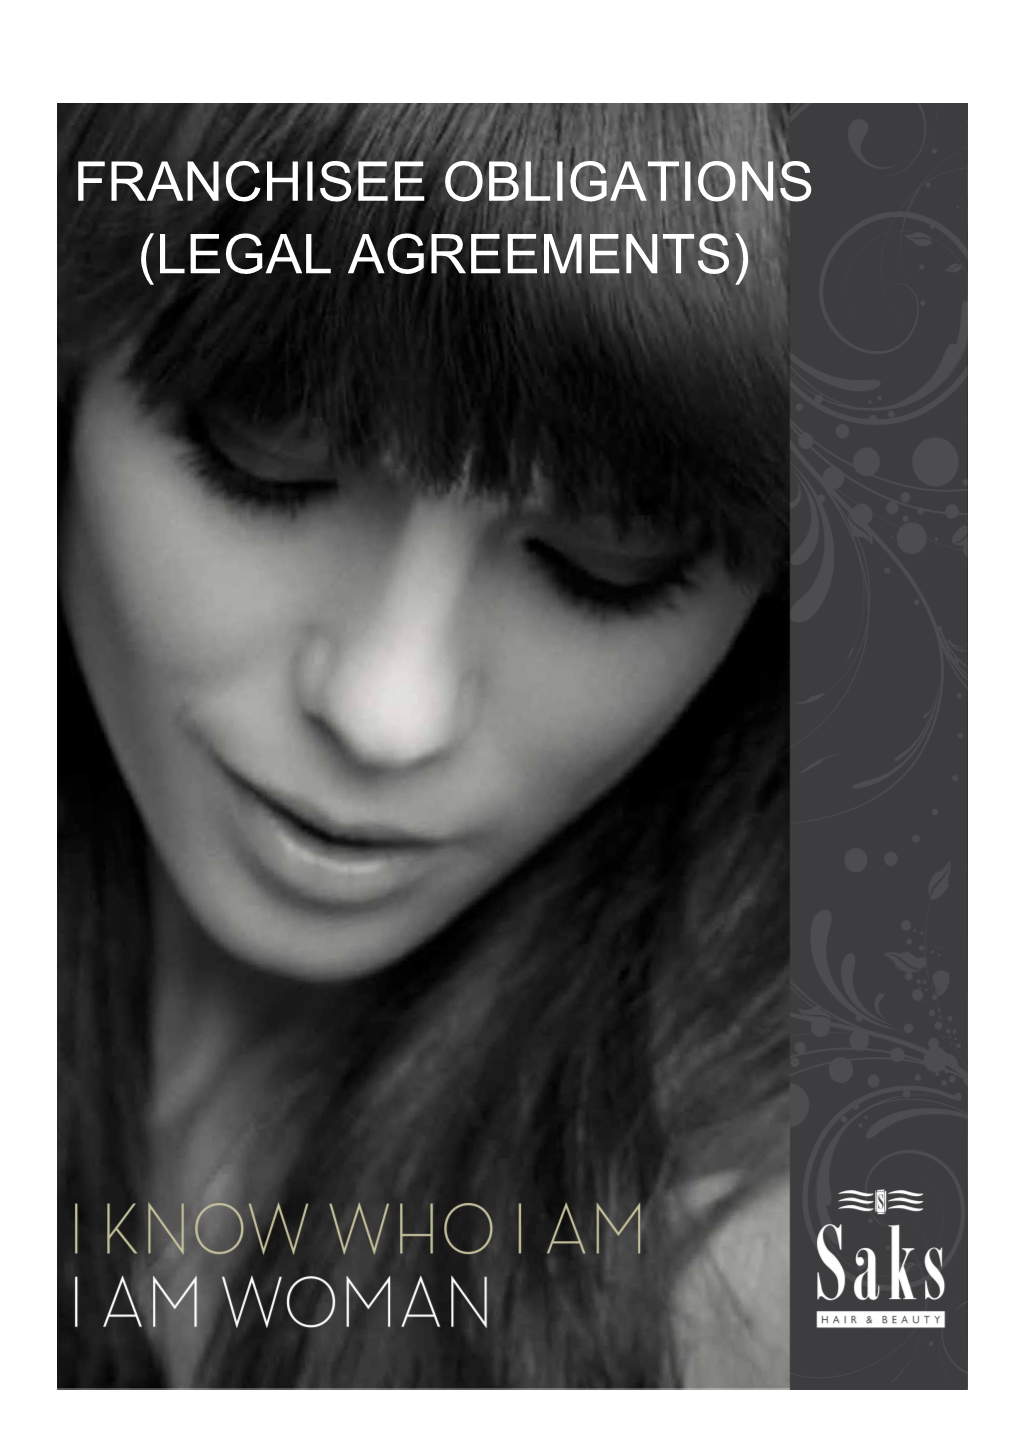 Franchisee Obligations (Legal Agreements)